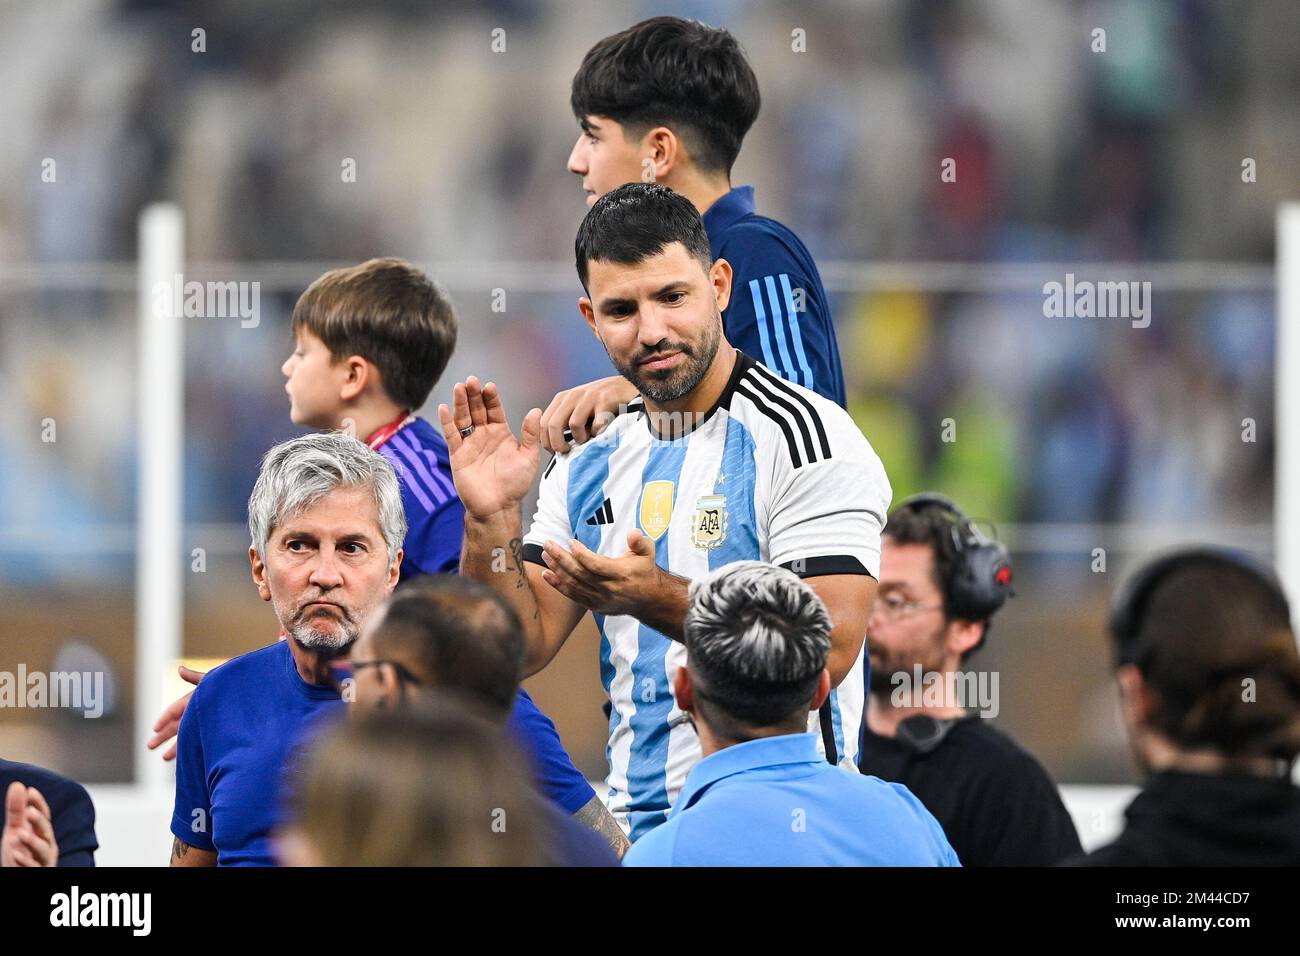 LUSAIL CITY, QATAR - DECEMBER 18: Sergio Aguero of Argentina during the Final - FIFA World Cup Qatar 2022 match between Argentina and France at the Lusail Stadium on December 18, 2022 in Lusail City, Qatar (Photo by Pablo Morano/BSR Agency) Stock Photo